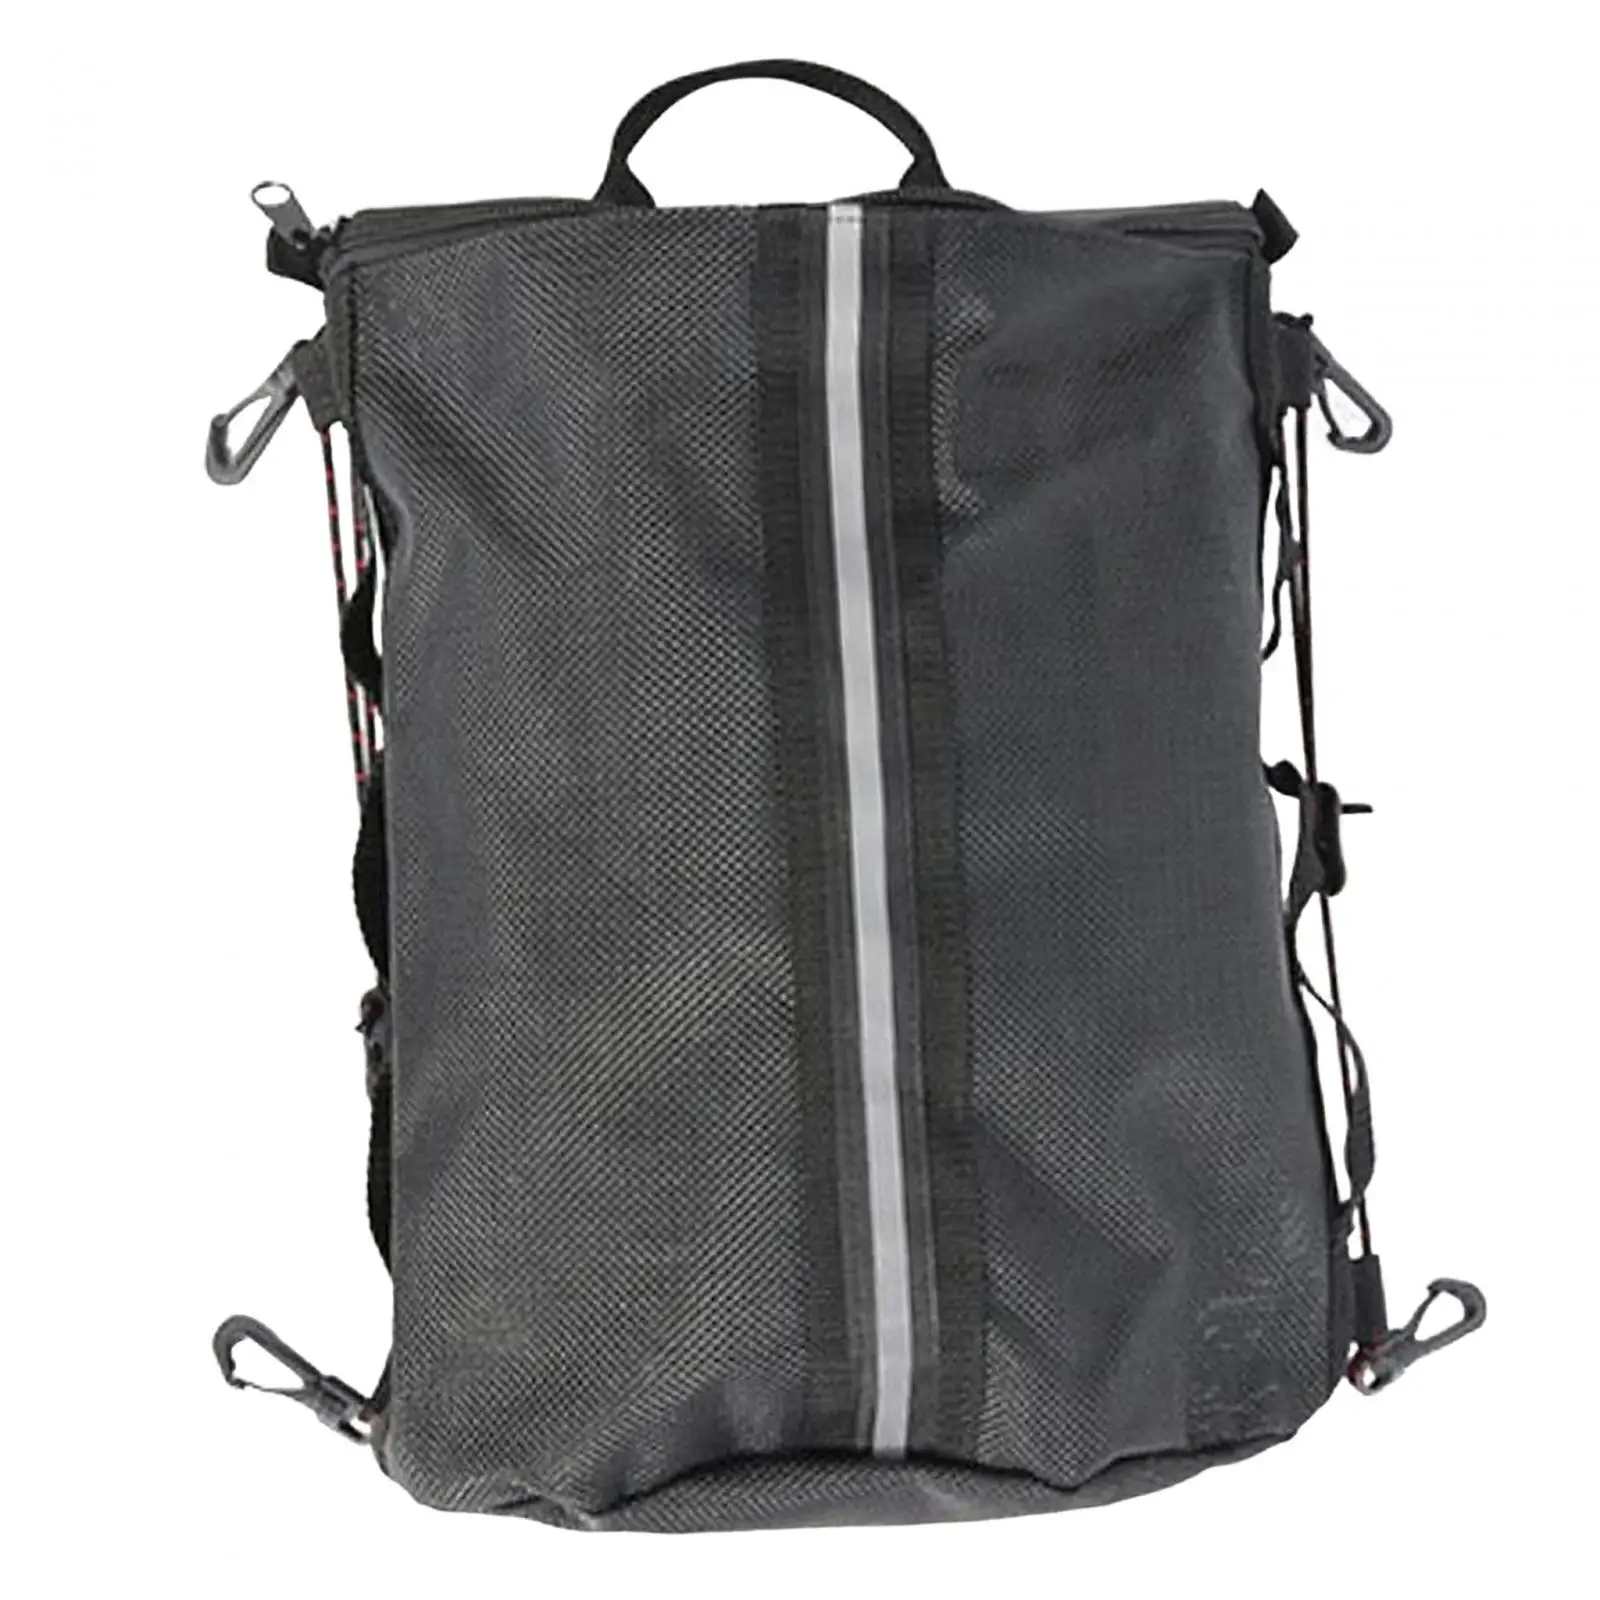 Portable Paddle Board Deck Bag Mesh Storage Bag Thermal Insulated Organizer for